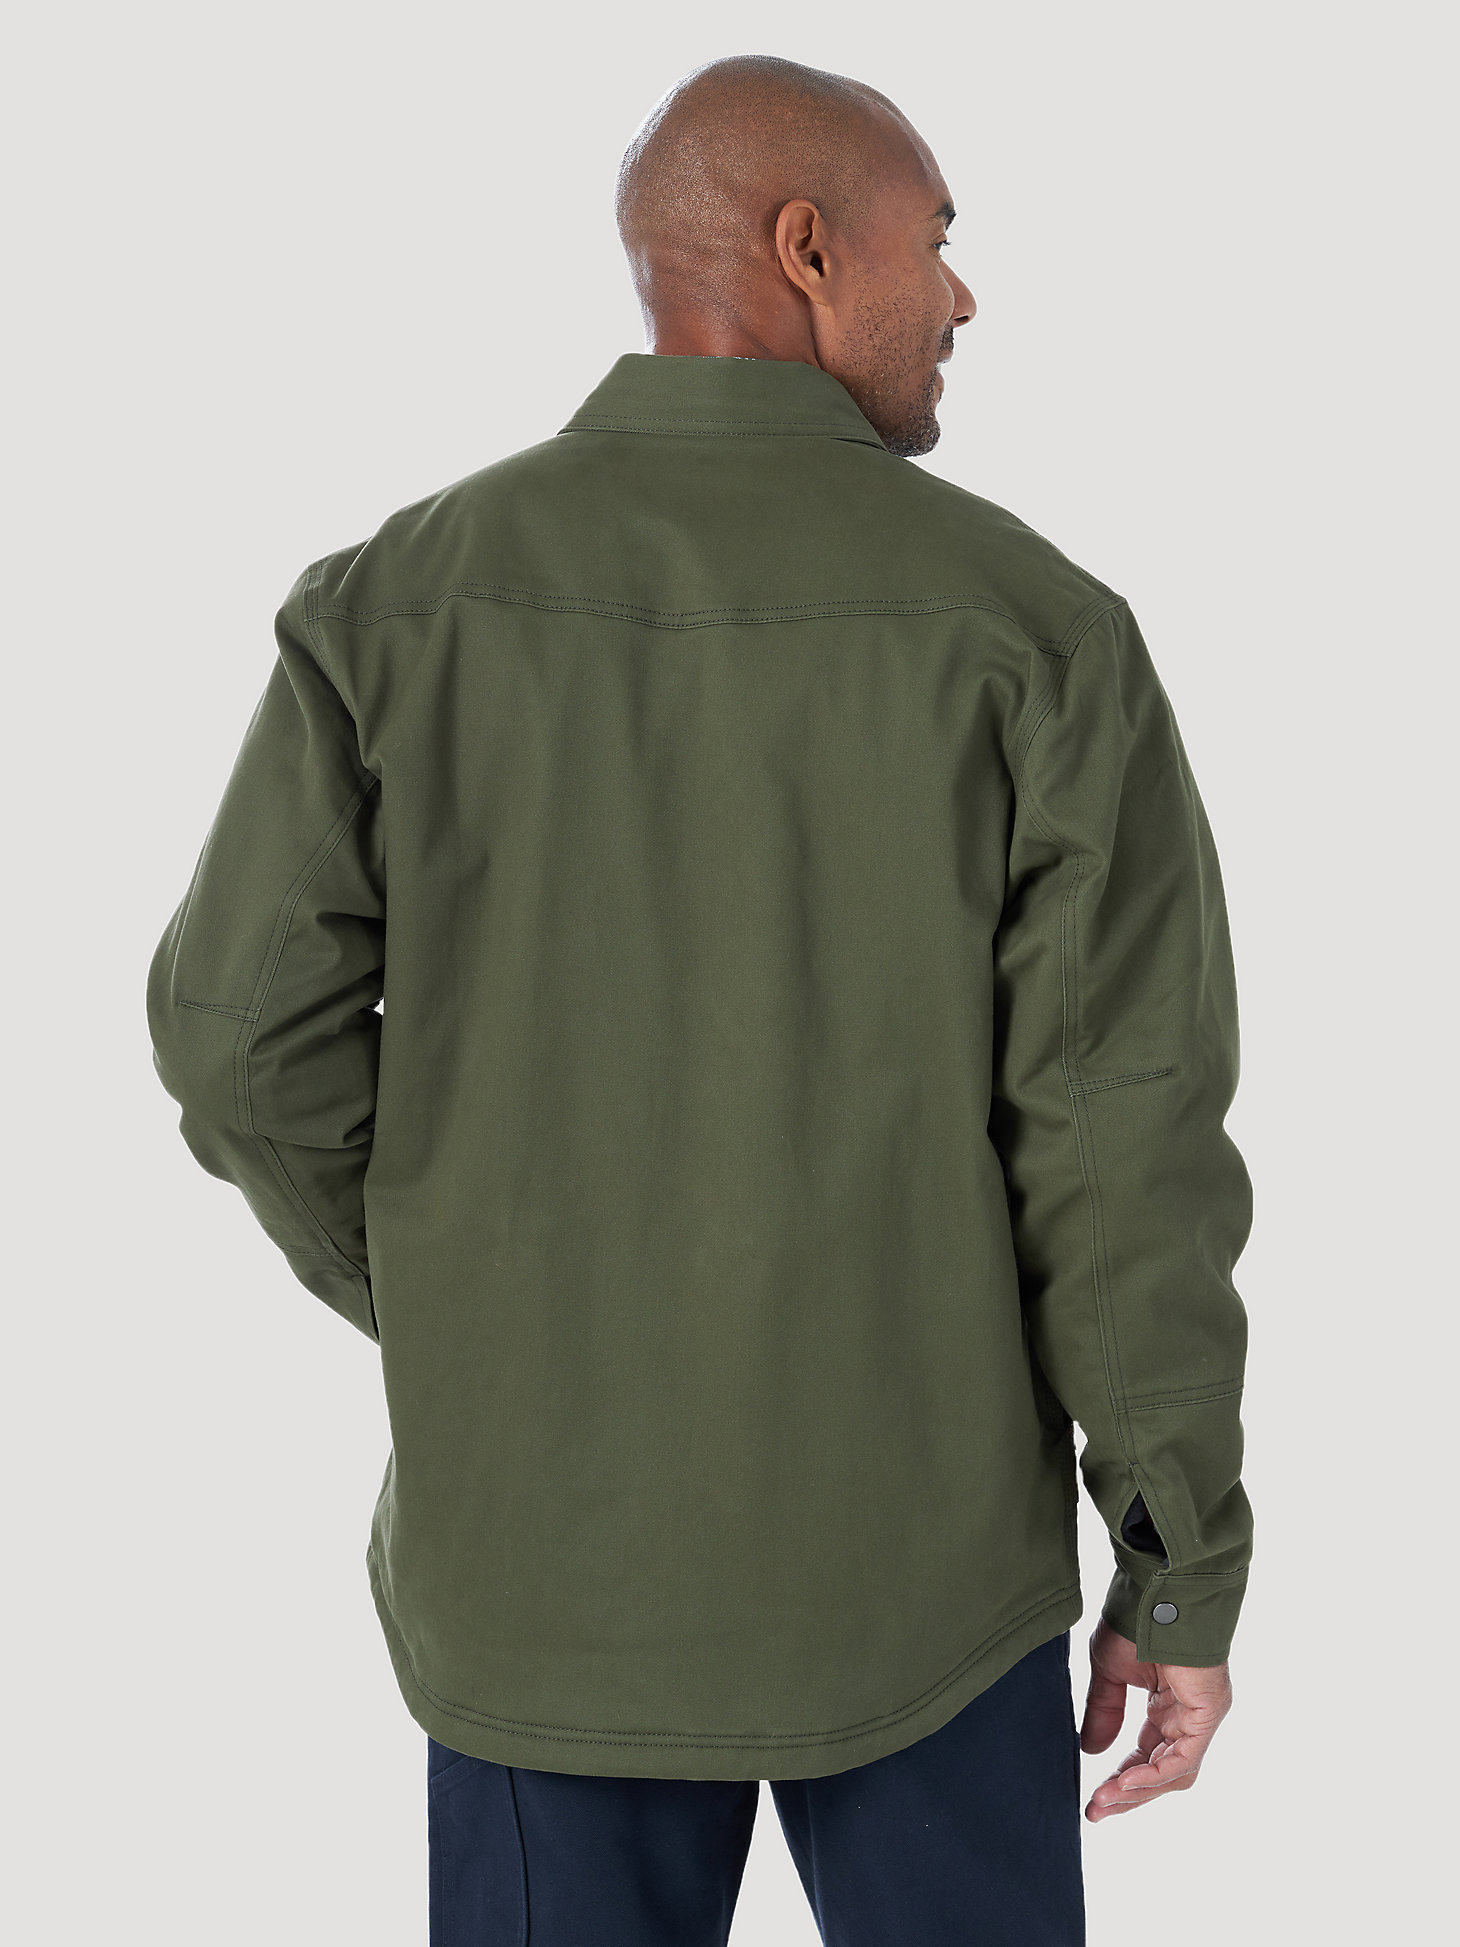 Wrangler® RIGGS Workwear® Tough Layers Fleece Lined Work Shirt Jacket in Loden alternative view 1